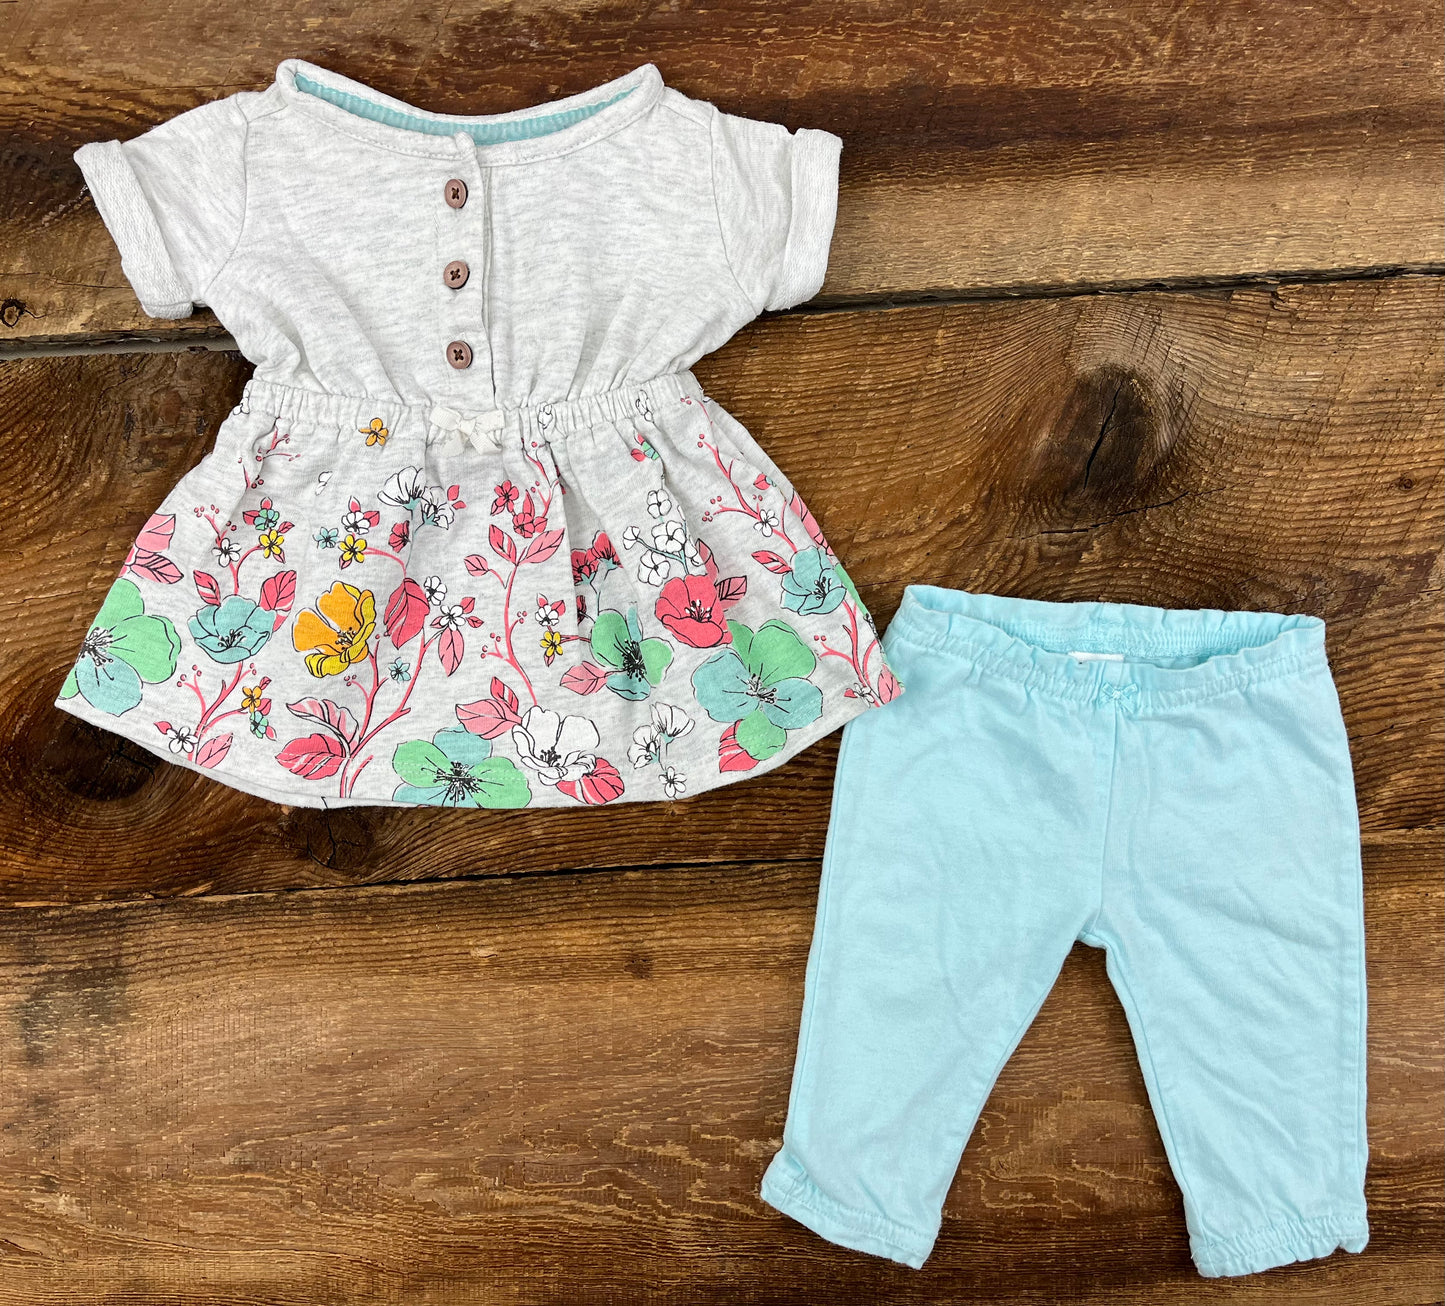 Carter’s NB Floral Tunic Outfit